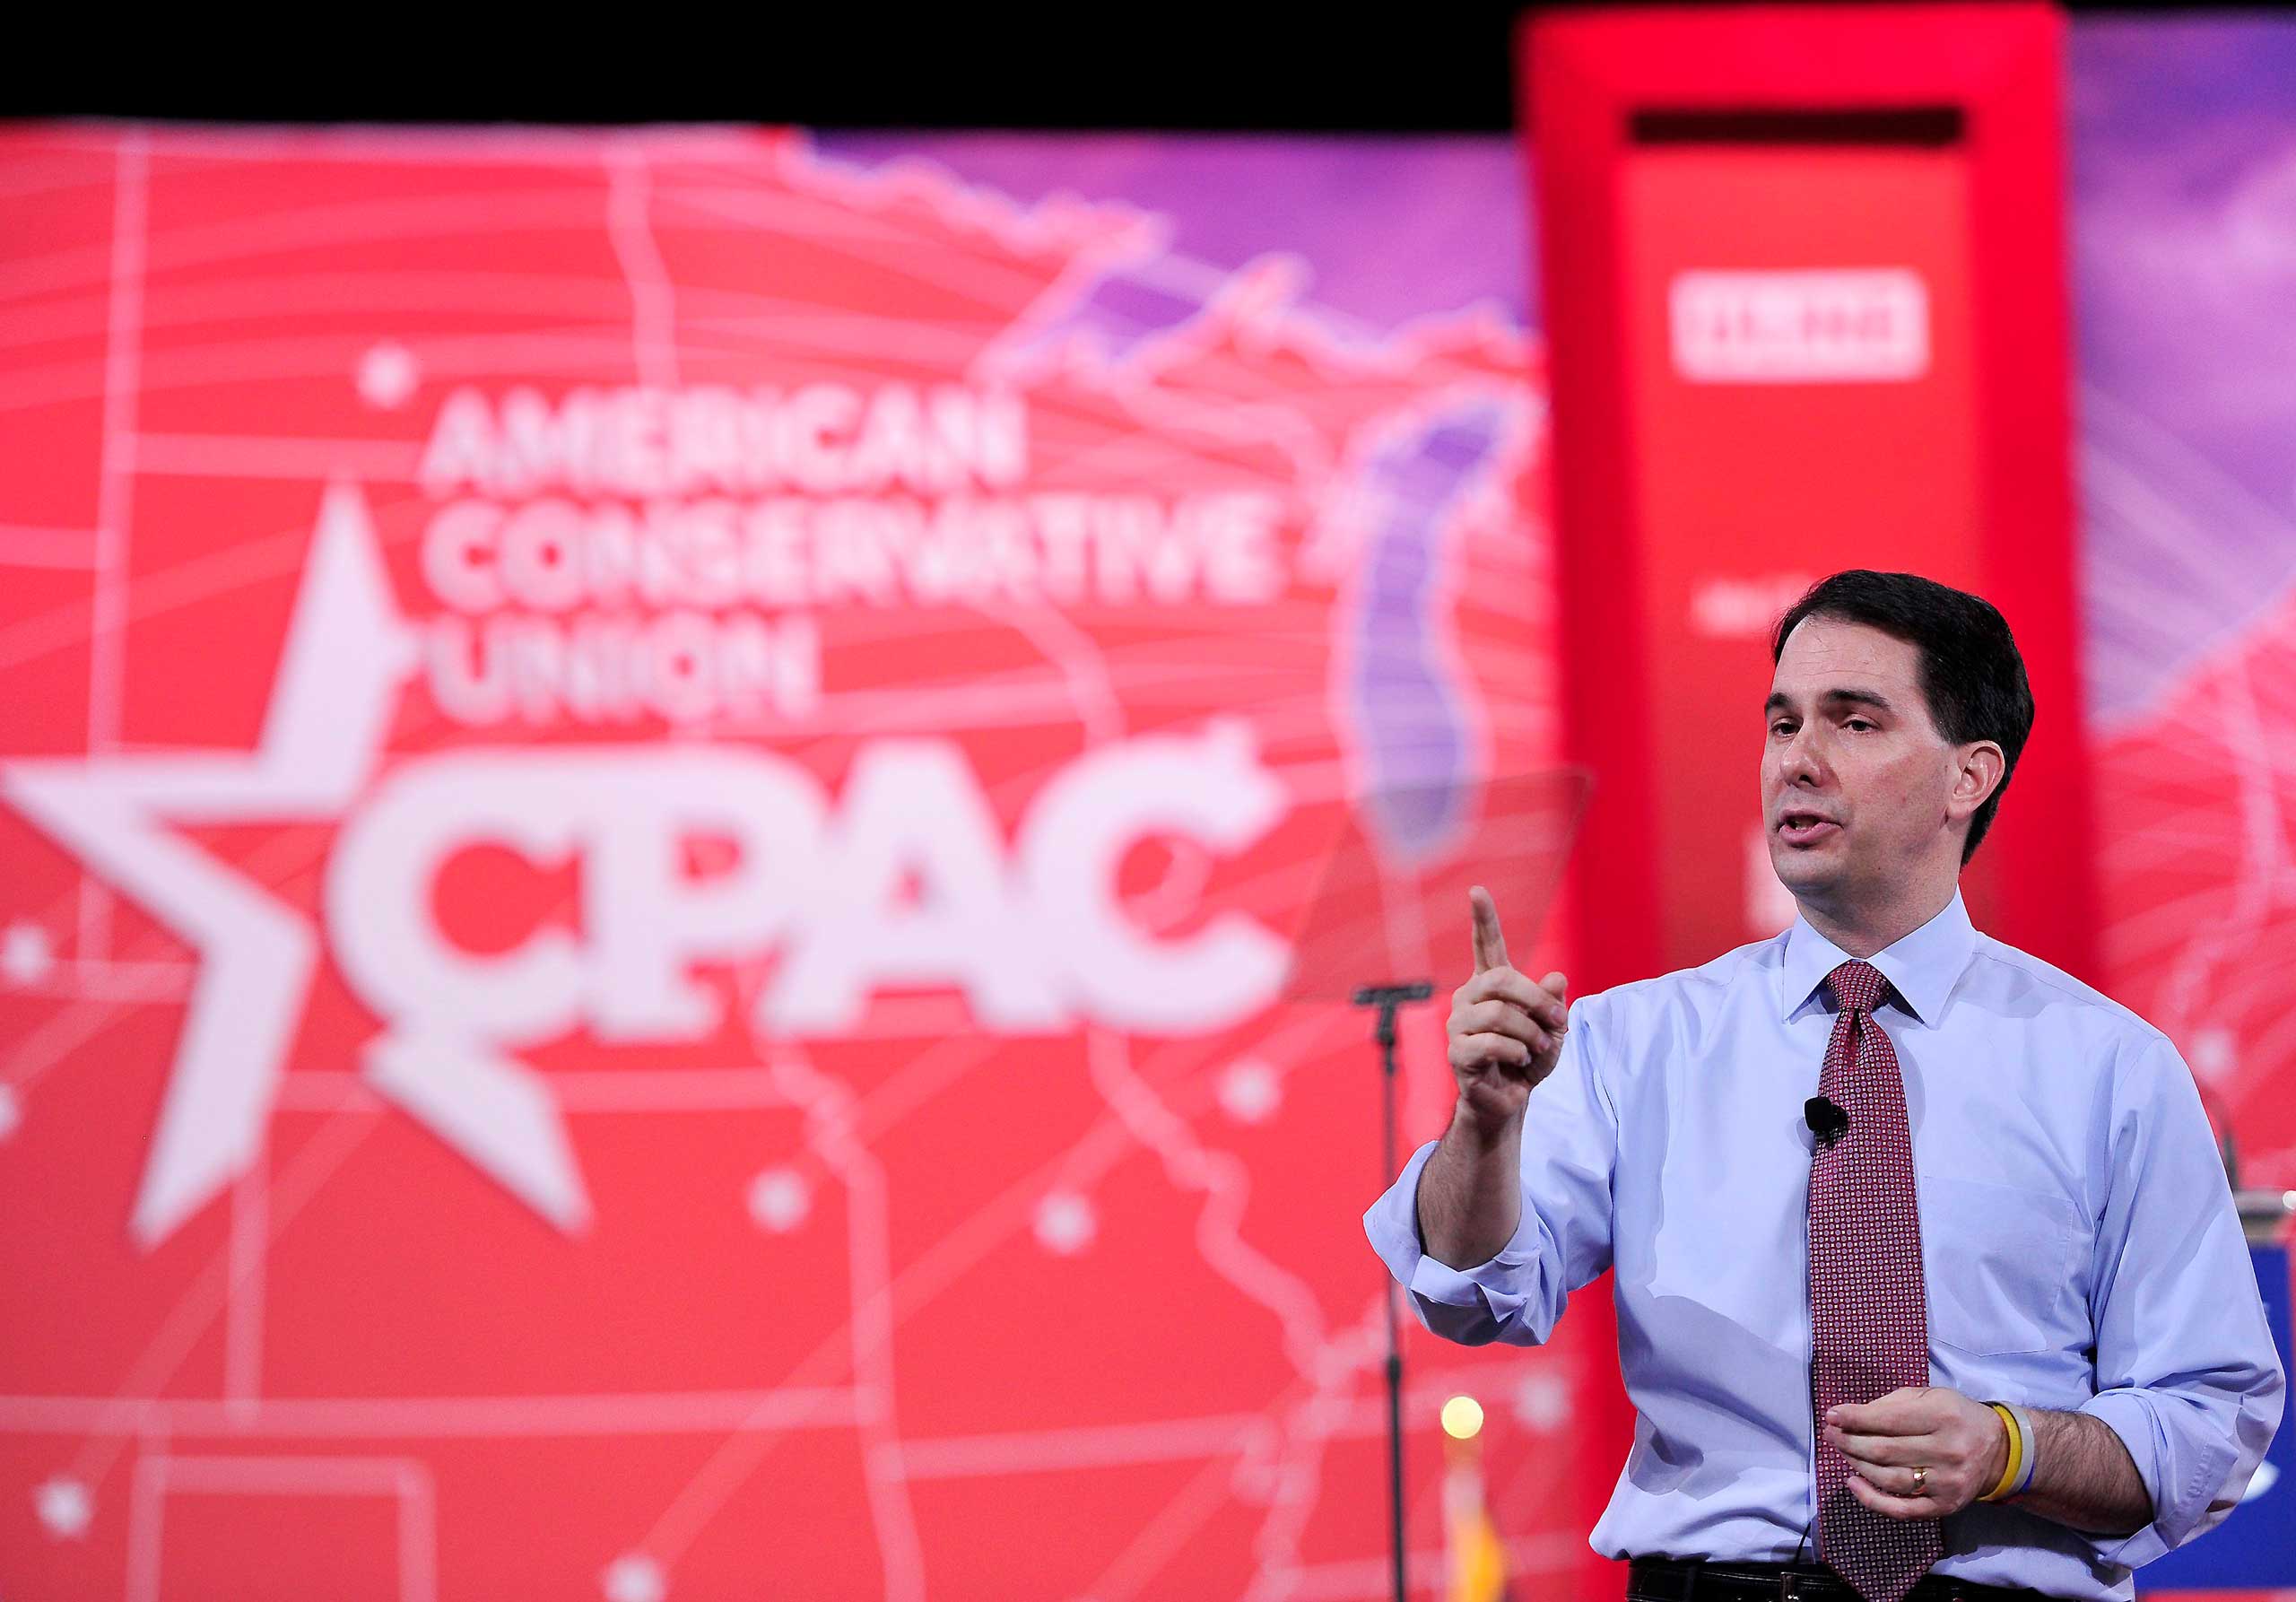 Wisconsin Governor Scott Walker speaks at the Conservative Political Action Conference (CPAC) in National Harbor, Md. on Feb.  26, 2015. (Ron Sachs—Corbis)